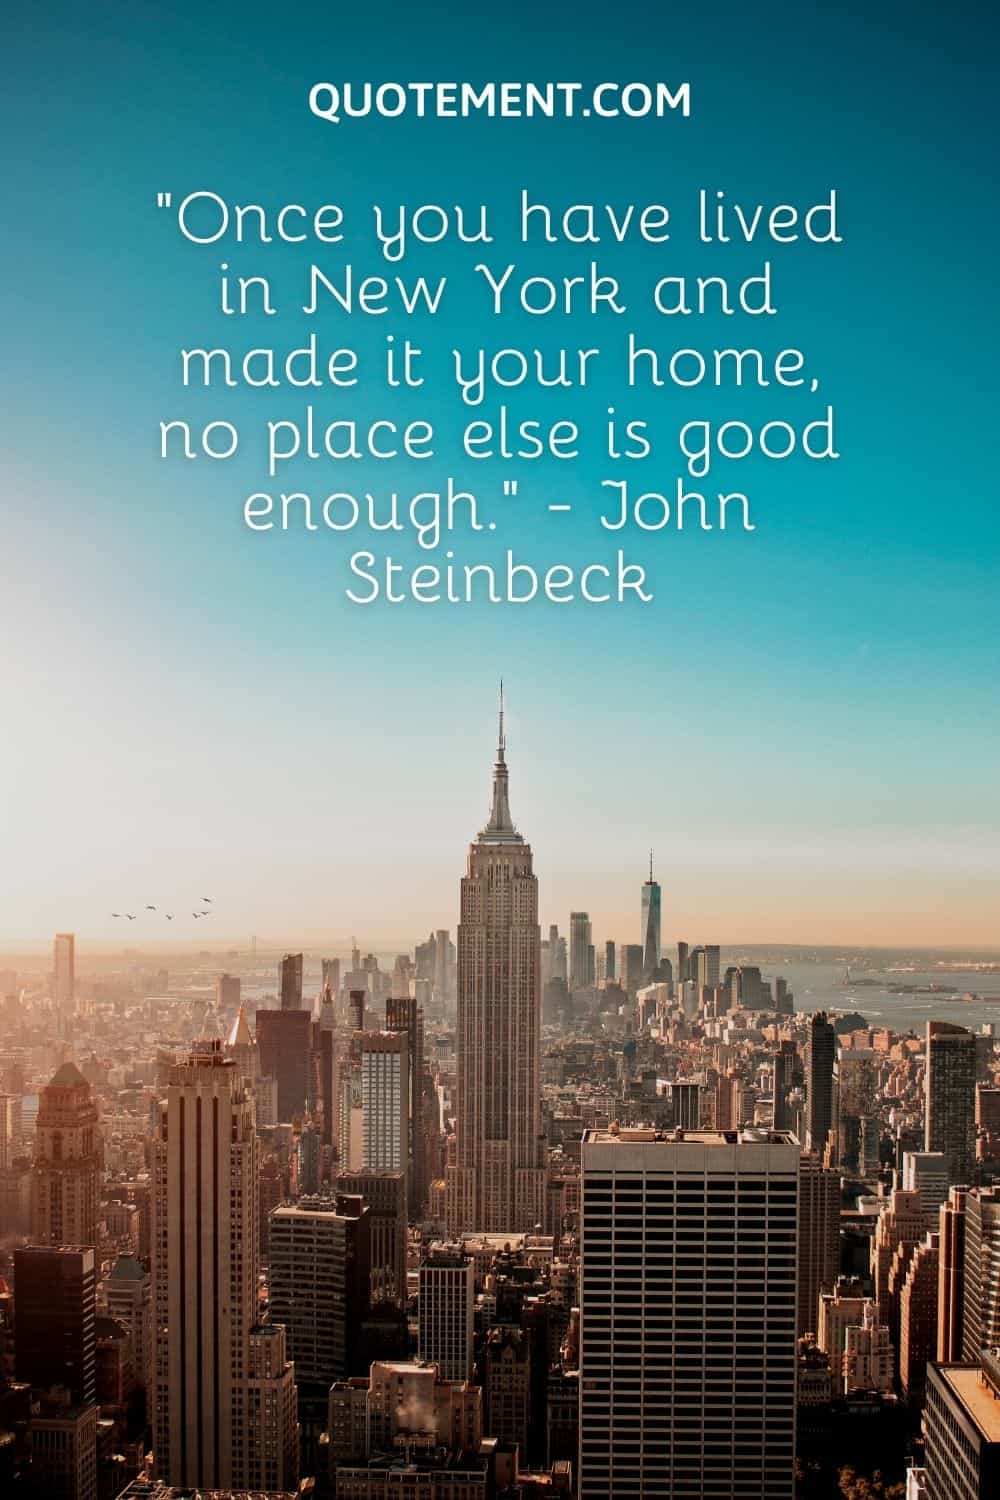 Once you have lived in New York and made it your home, no place else is good enough